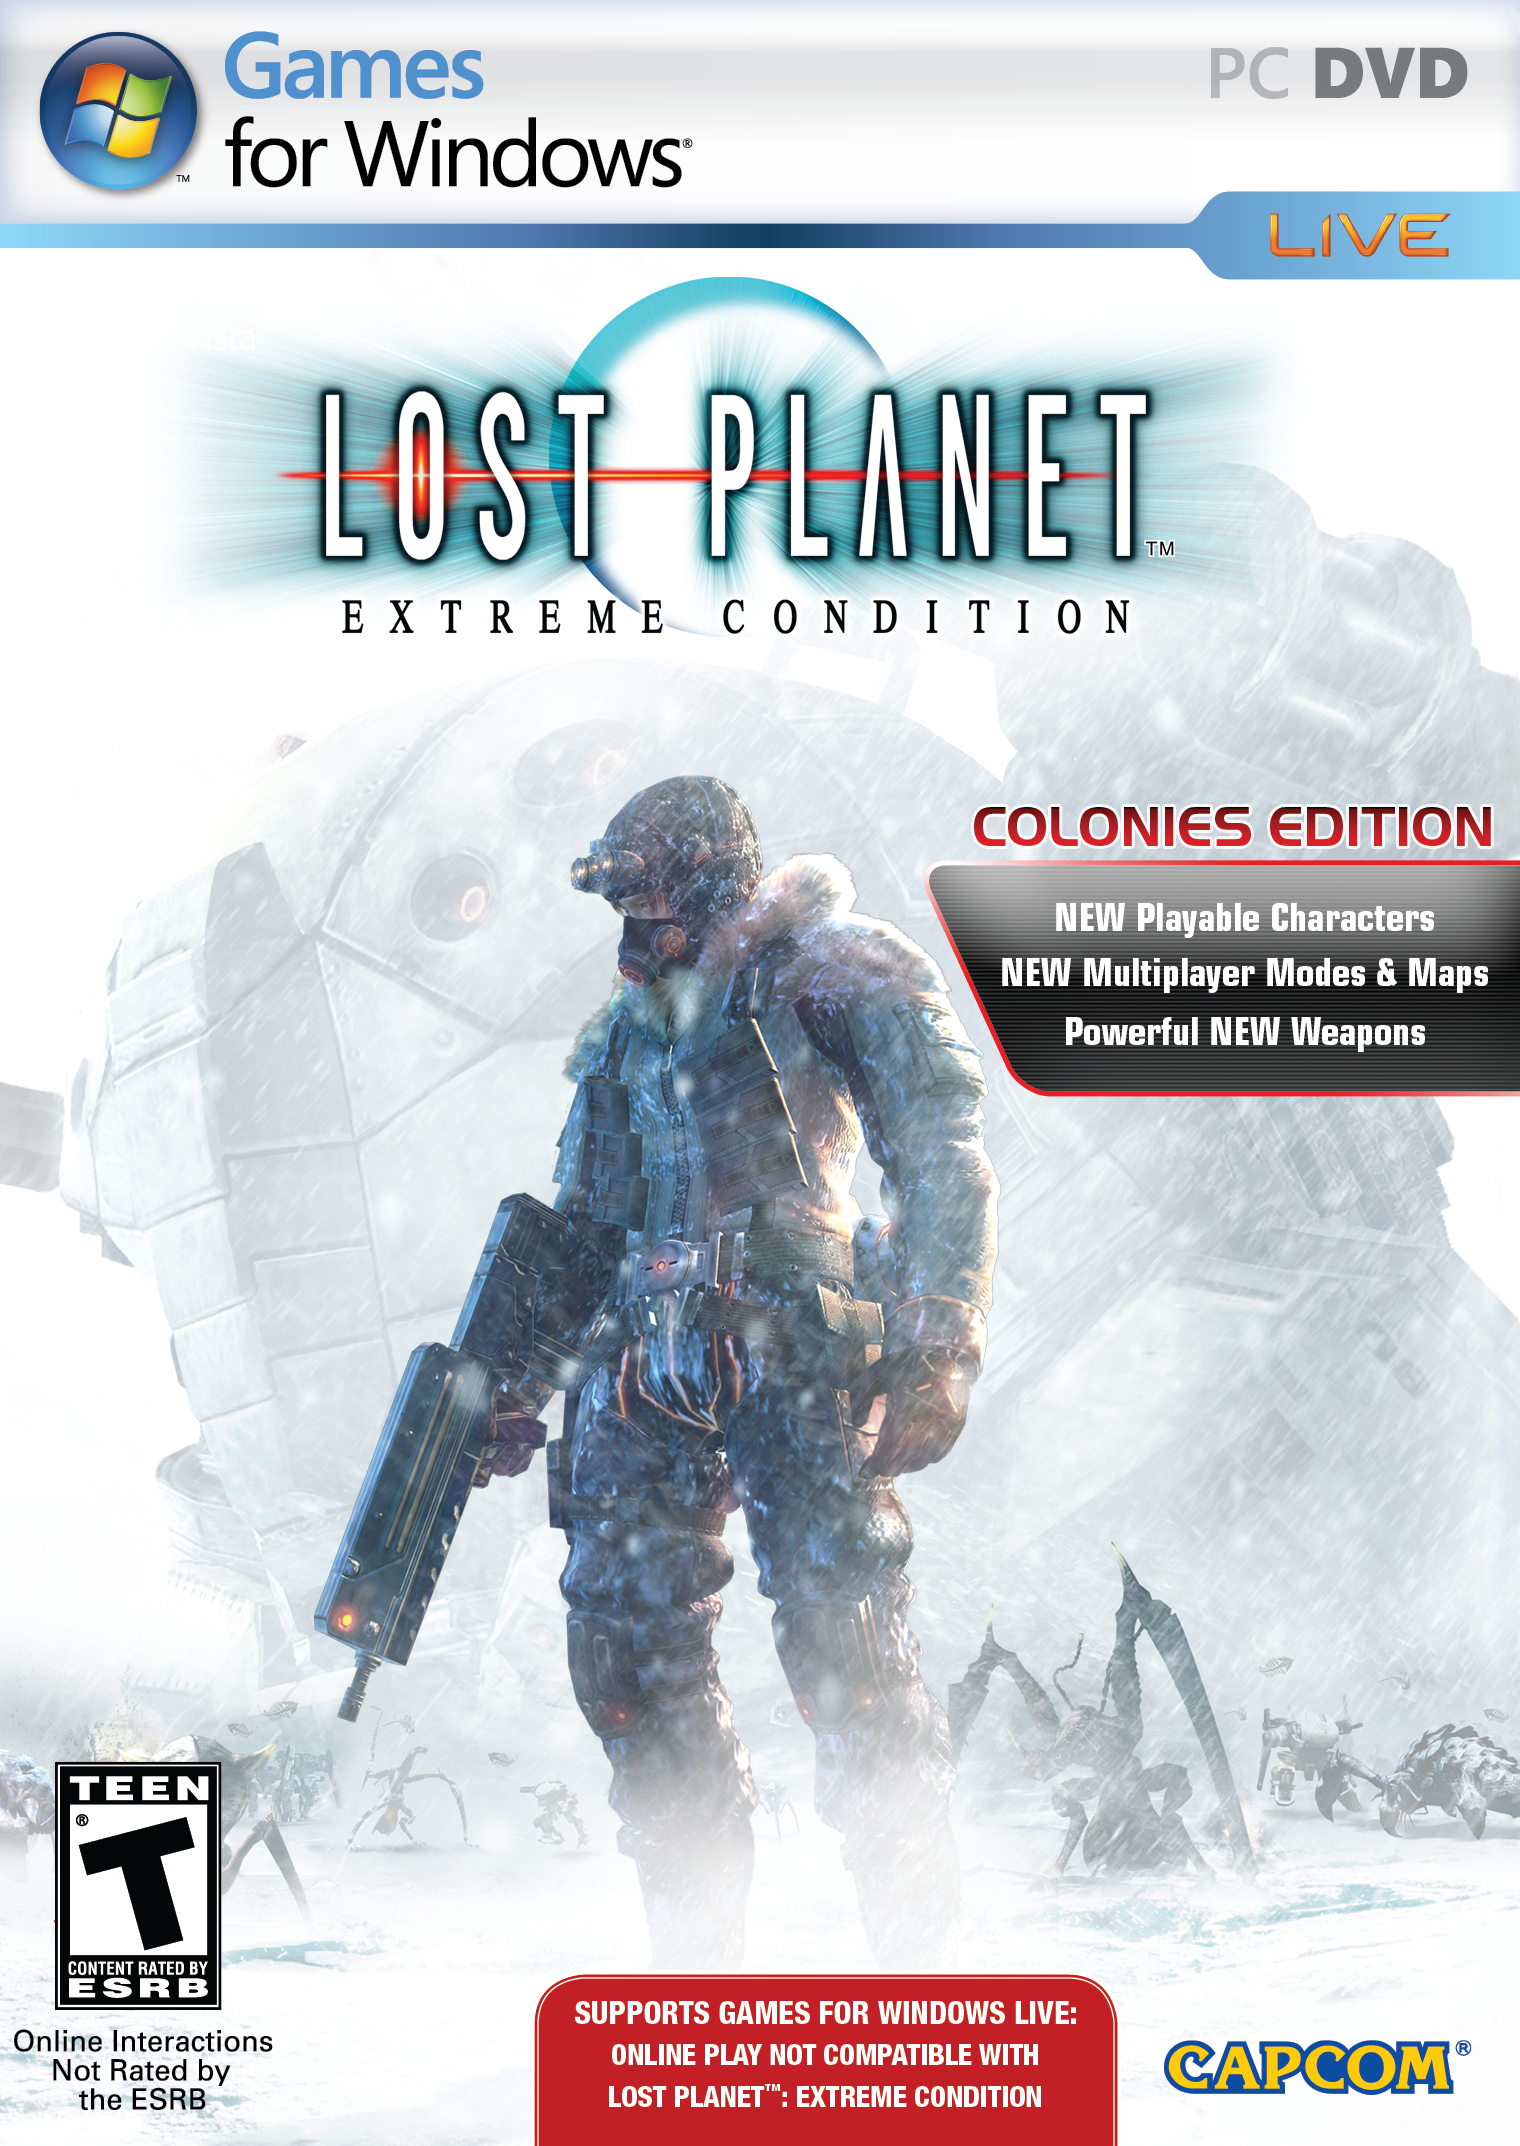 lost planet extreme condition colonies edition windows live crack